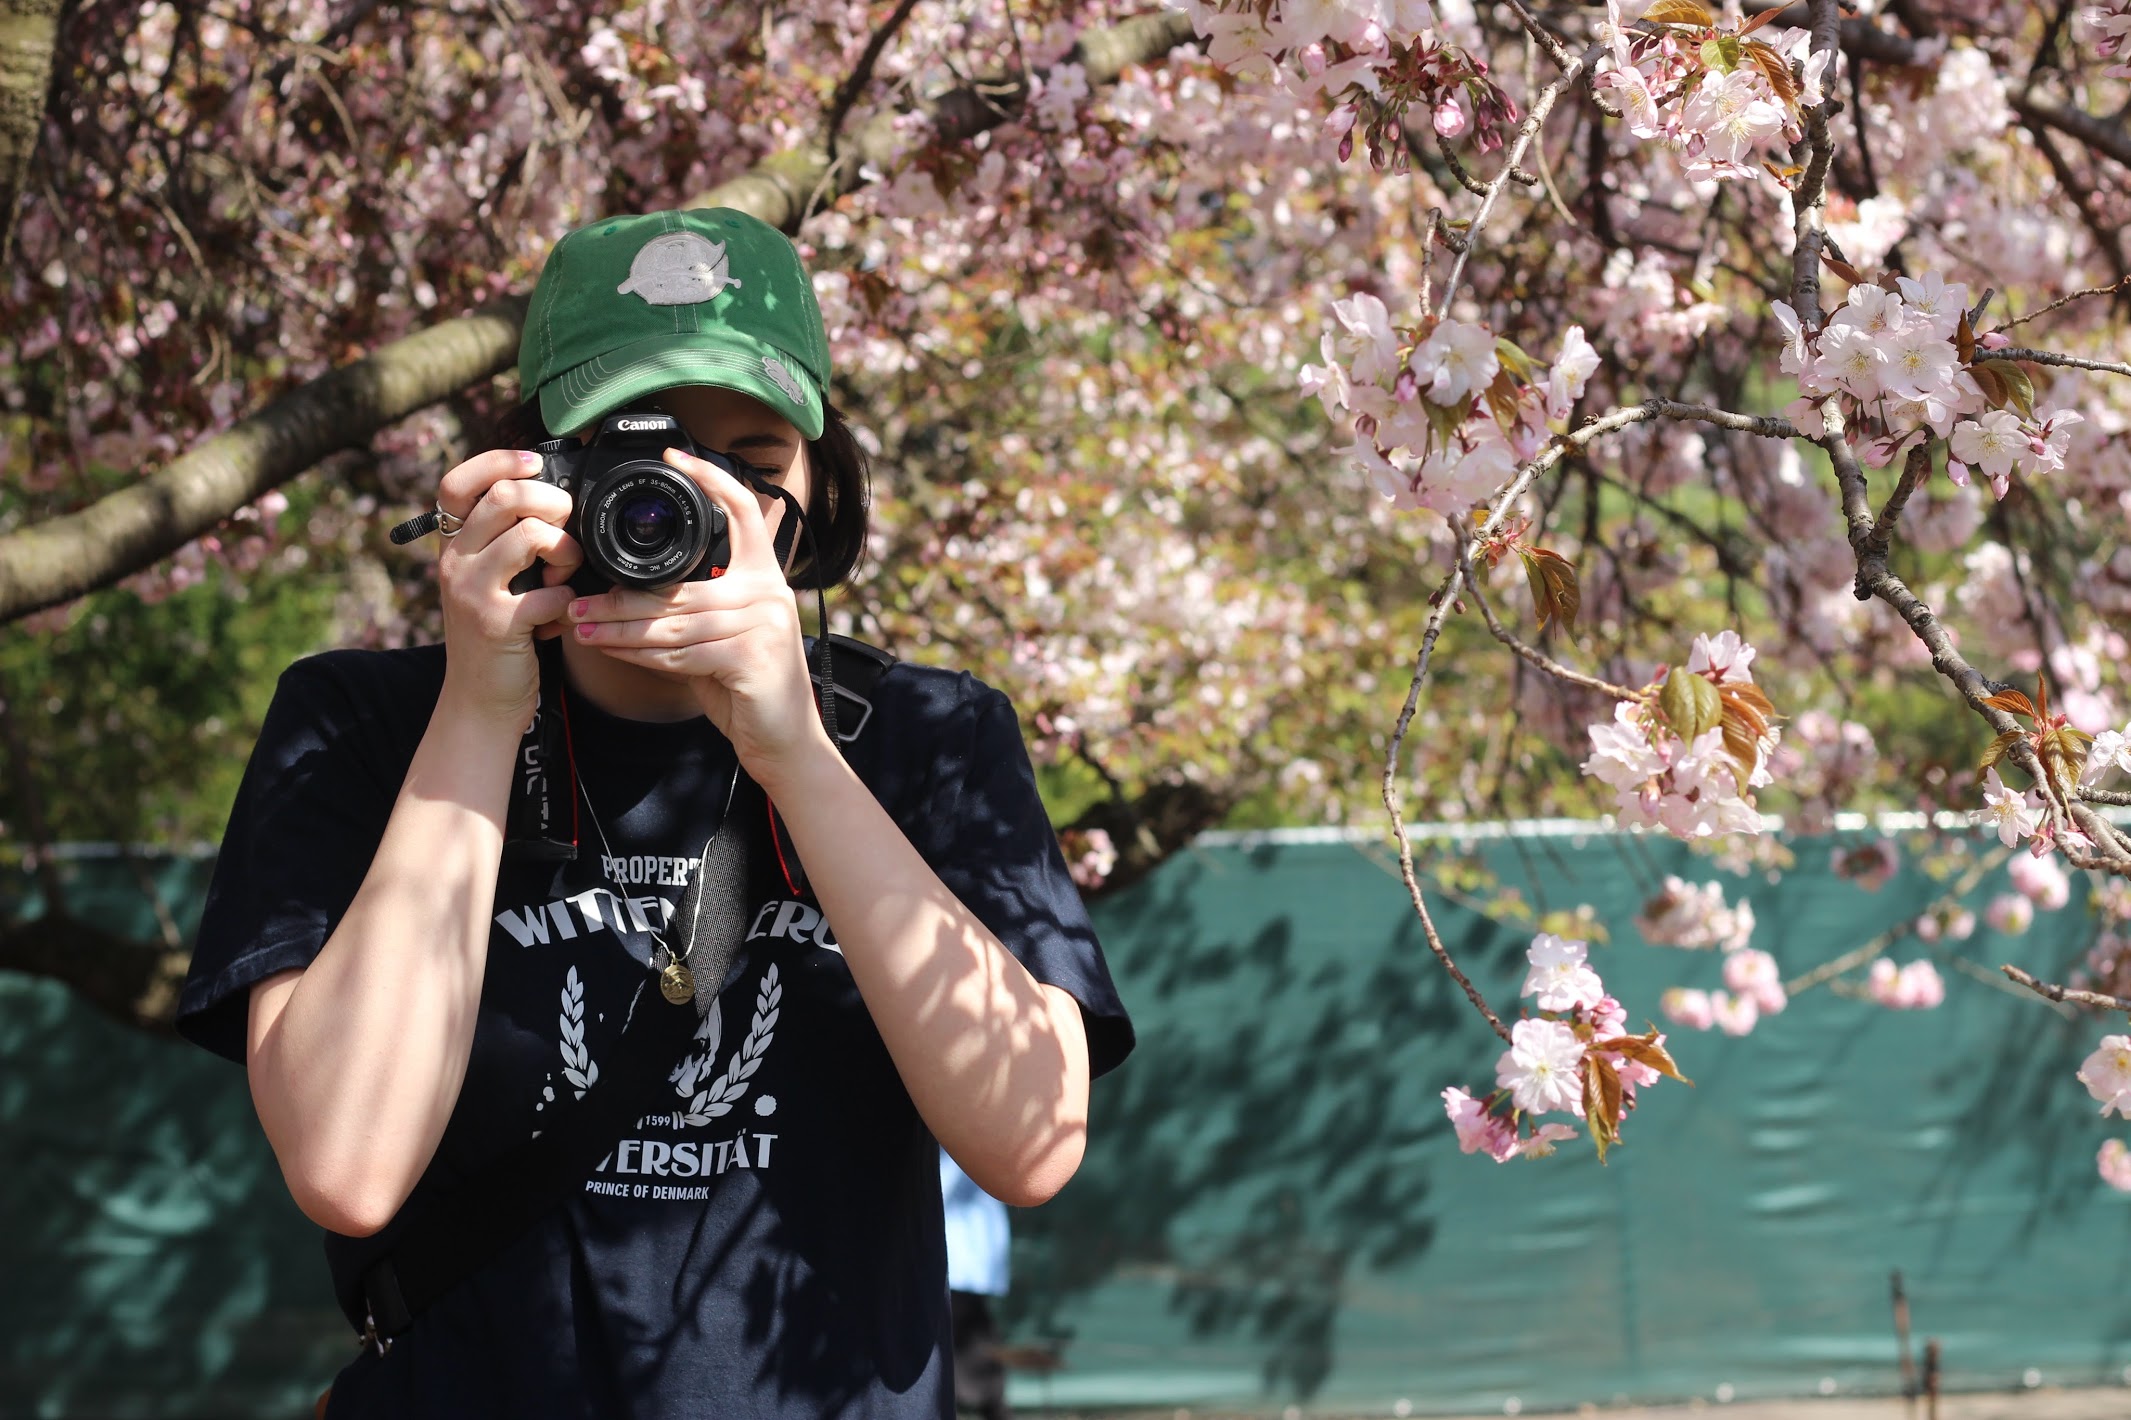 Mei poses with a camera in front of a cherry blossom tree